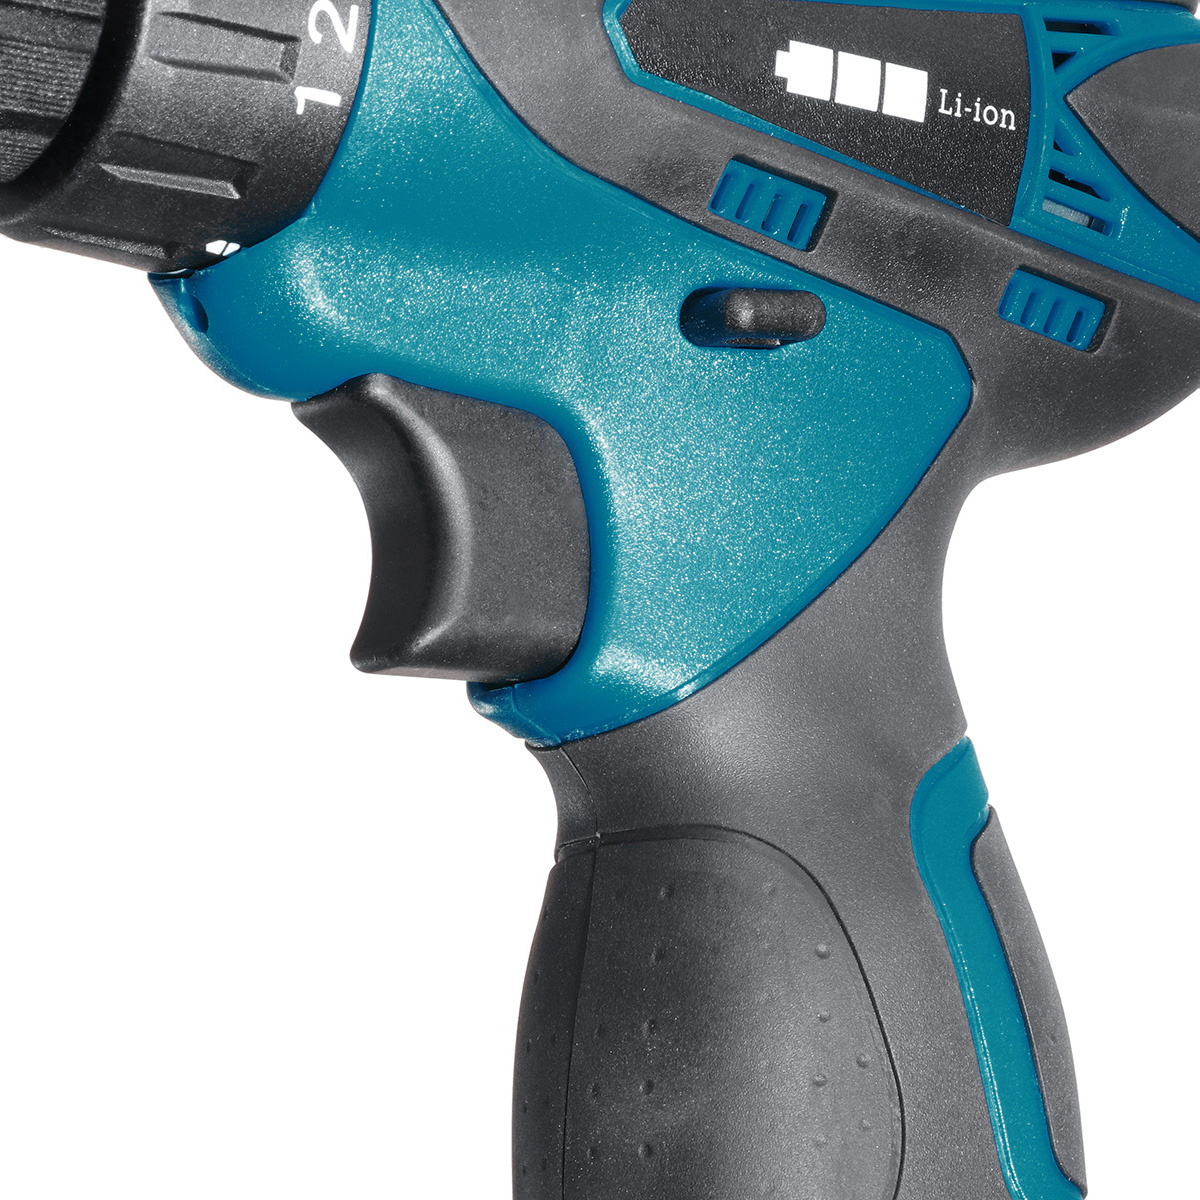 168V-Cordless-Electric-Drill-Driver-231-Torque-Multifuntional-Screwdriver-Power-Tool-W-Battery--Dril-1863336-10